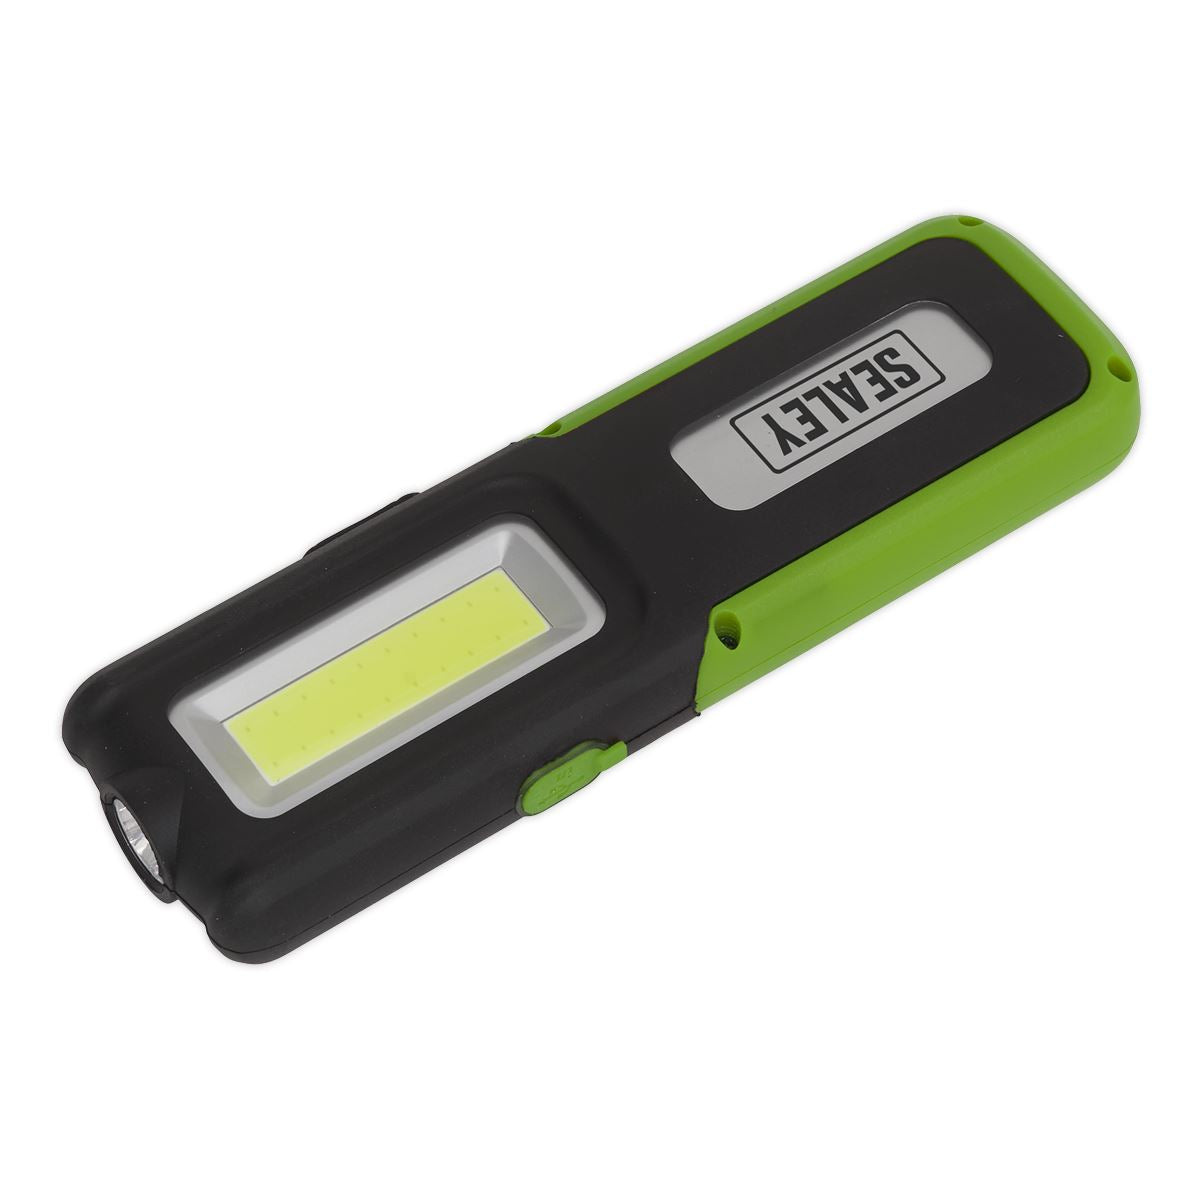 Sealey Rechargeable Inspection Light 5W COB & 3W SMD LED with Power Bank - Green